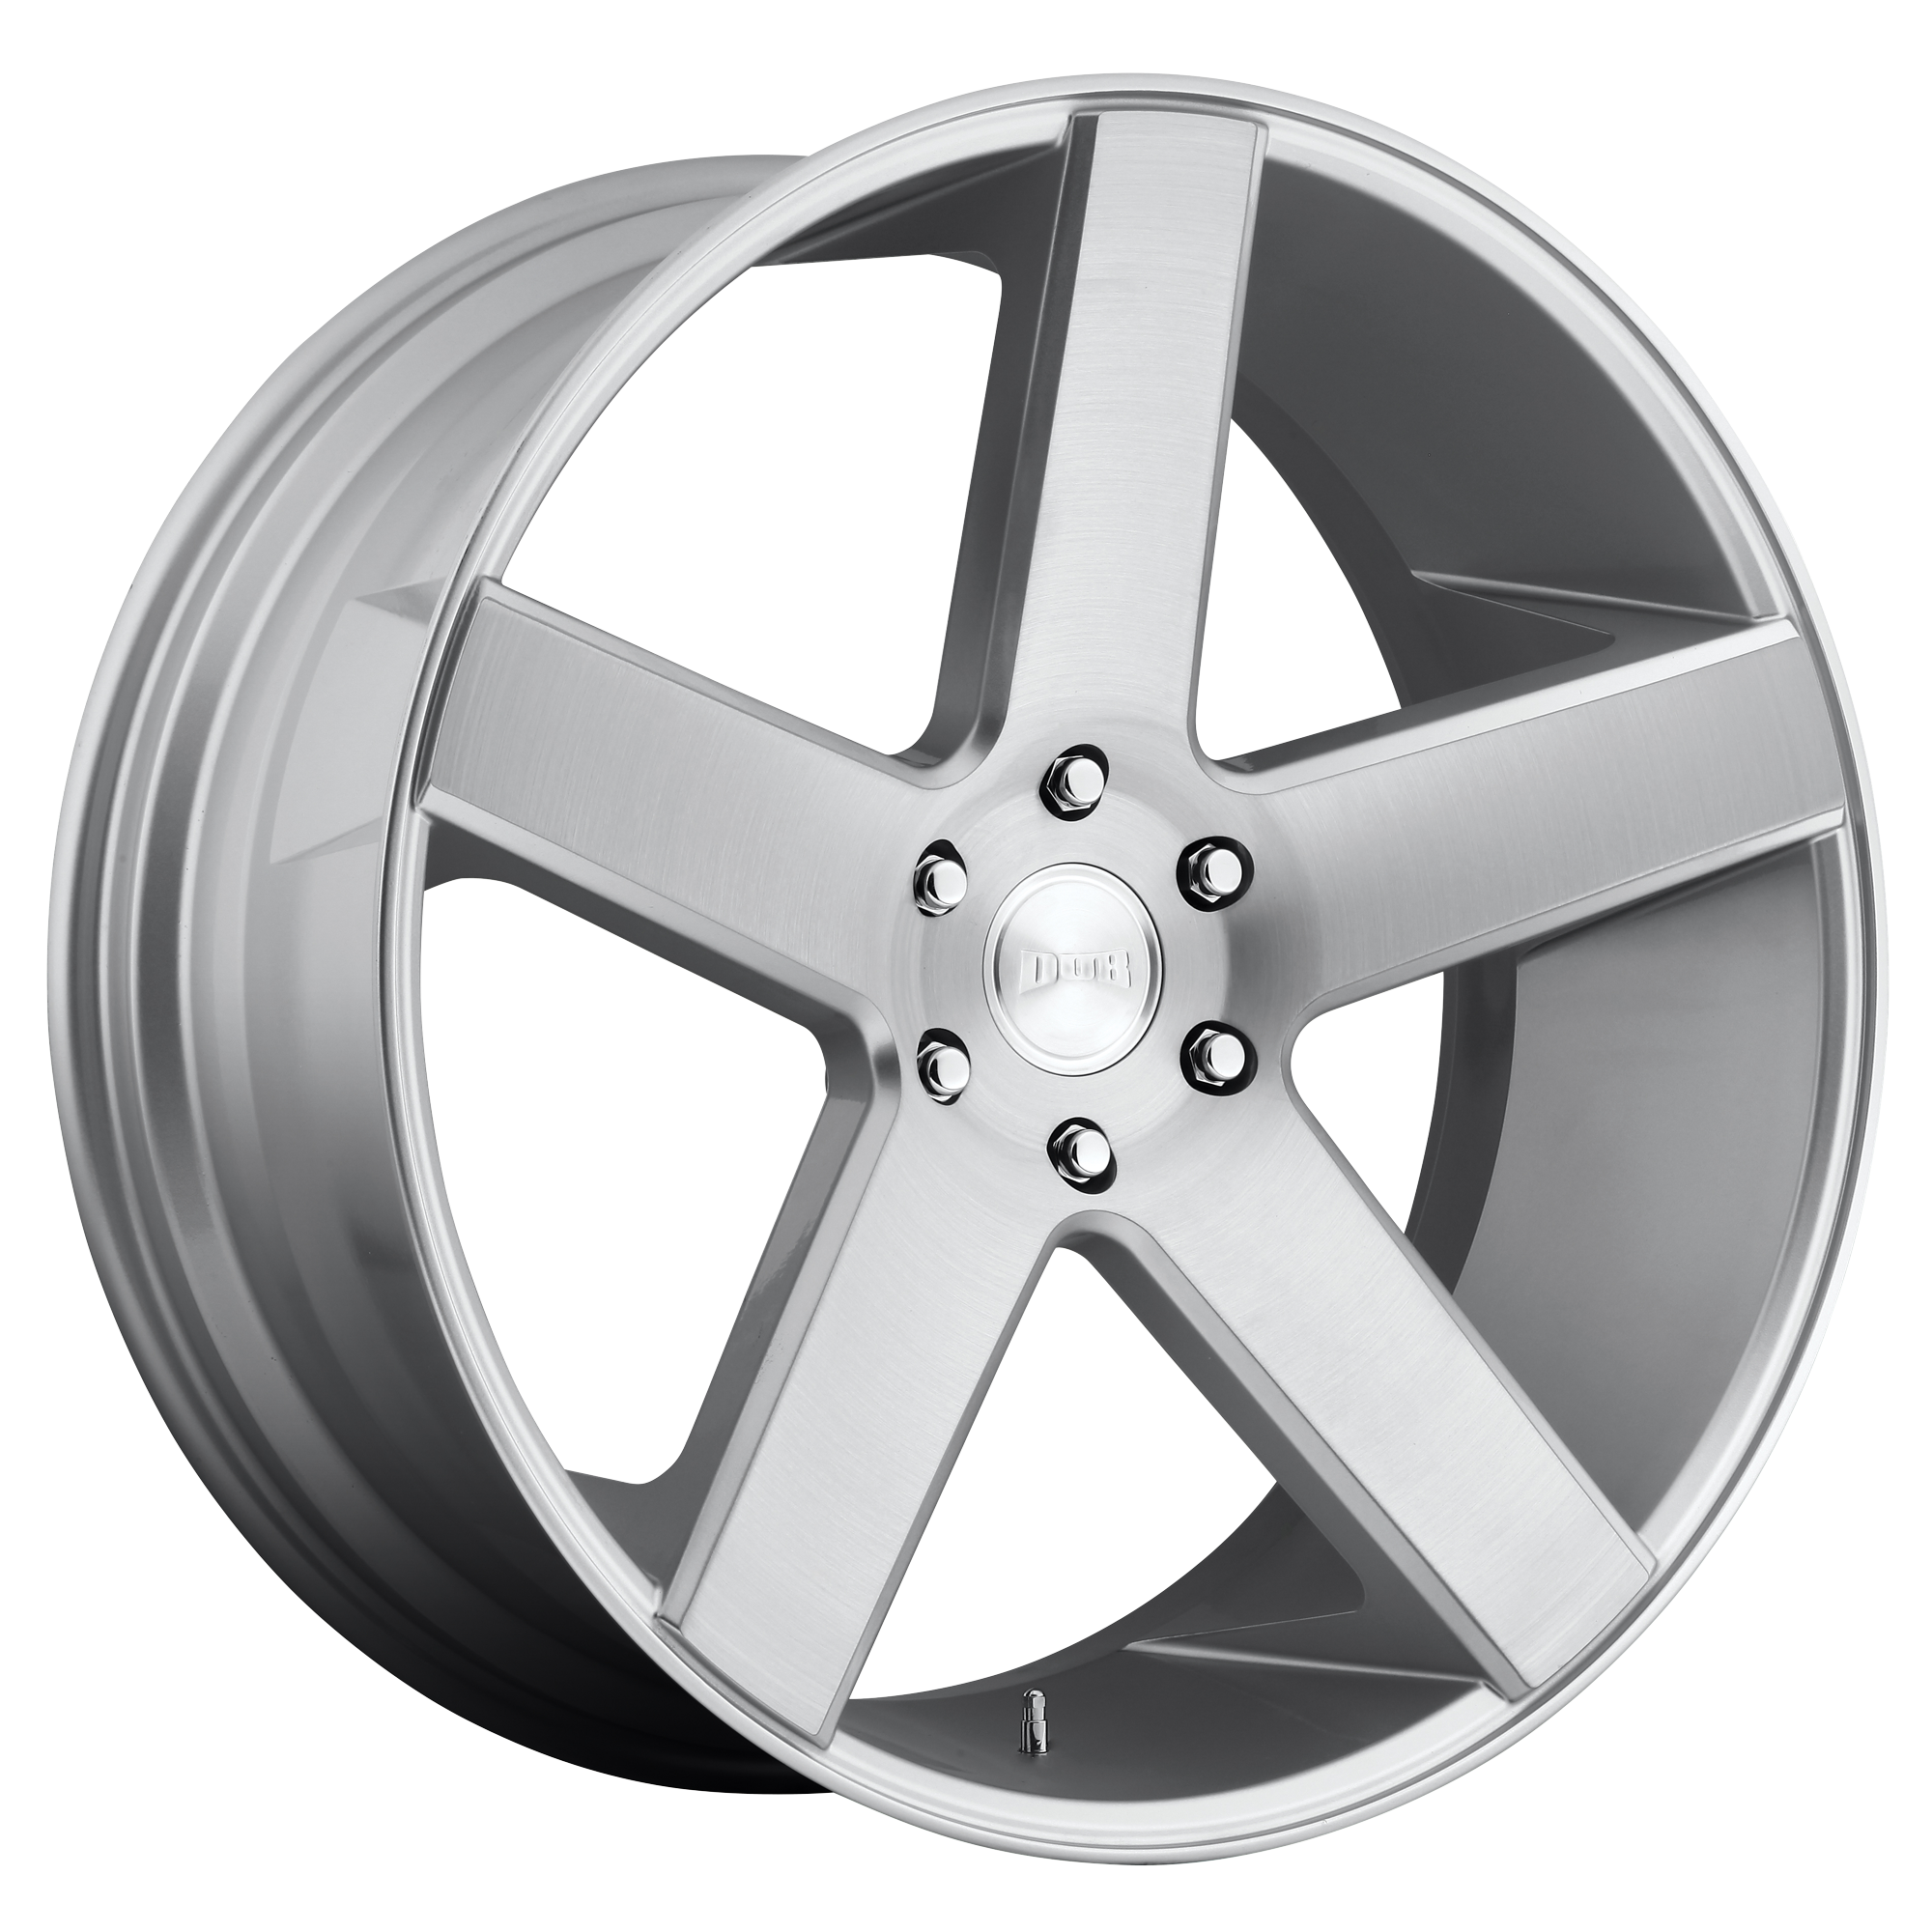 BALLER 26x10 6x139.70 GLOSS SILVER BRUSHED (31 mm) - Tires and Engine Performance